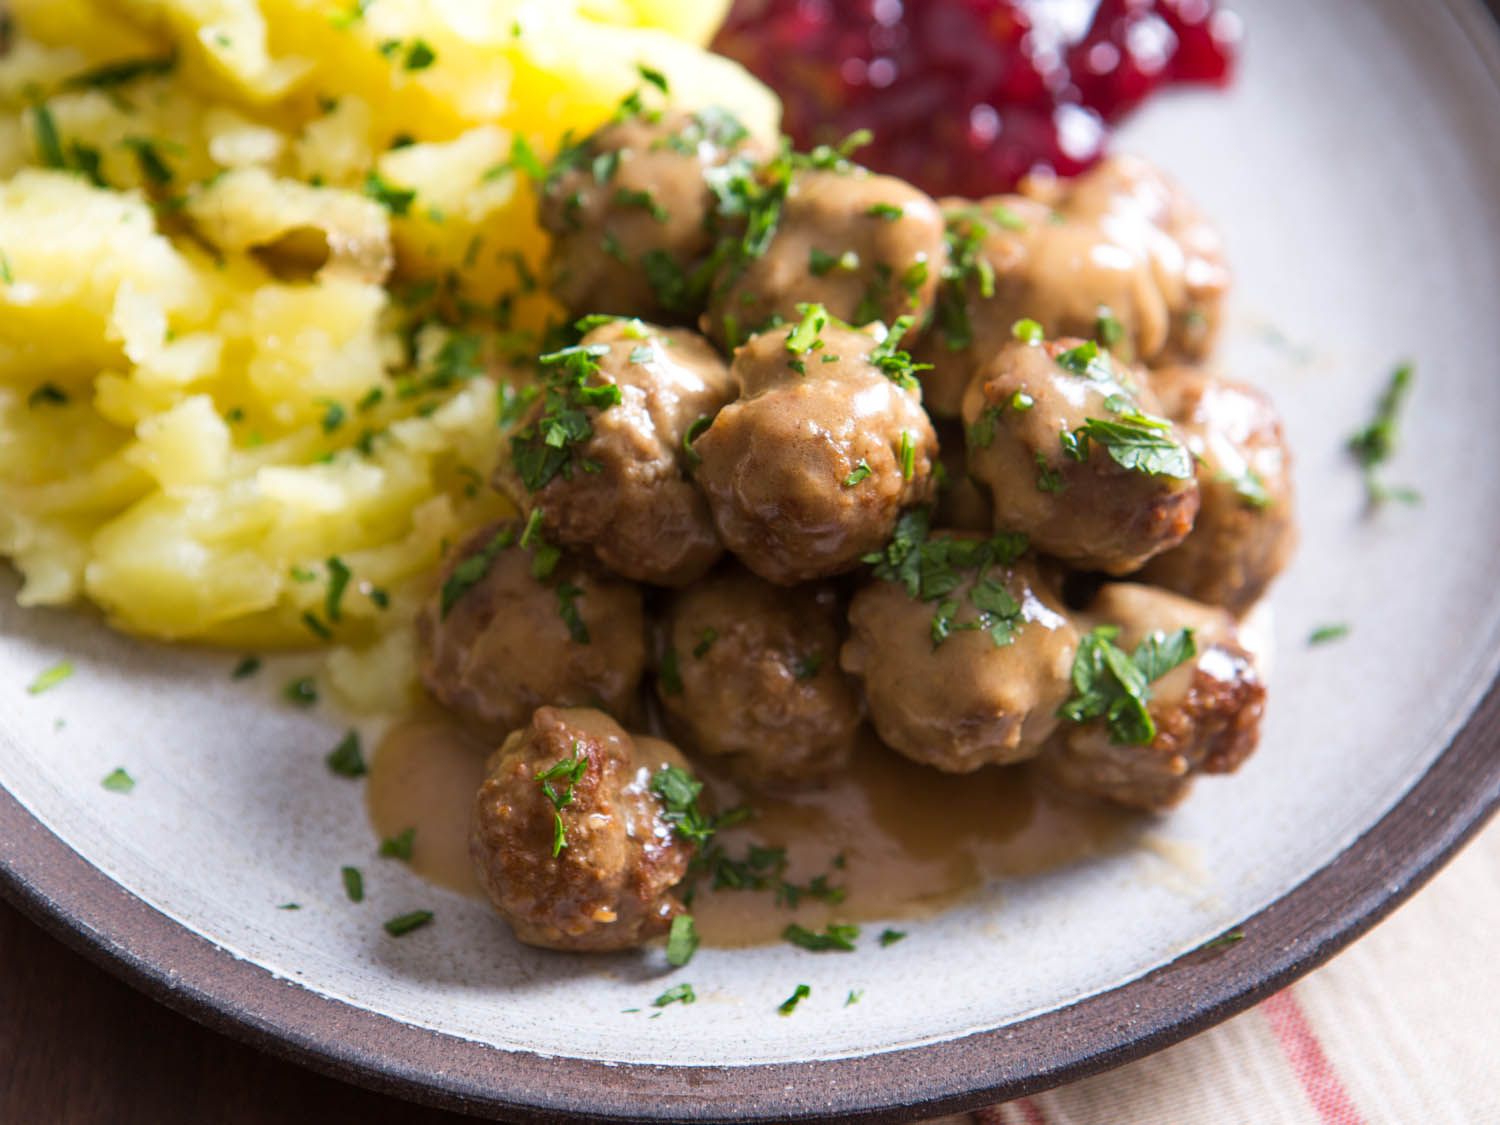 A plate with gravy-covered Swedish meatballs and mashed potatoes.